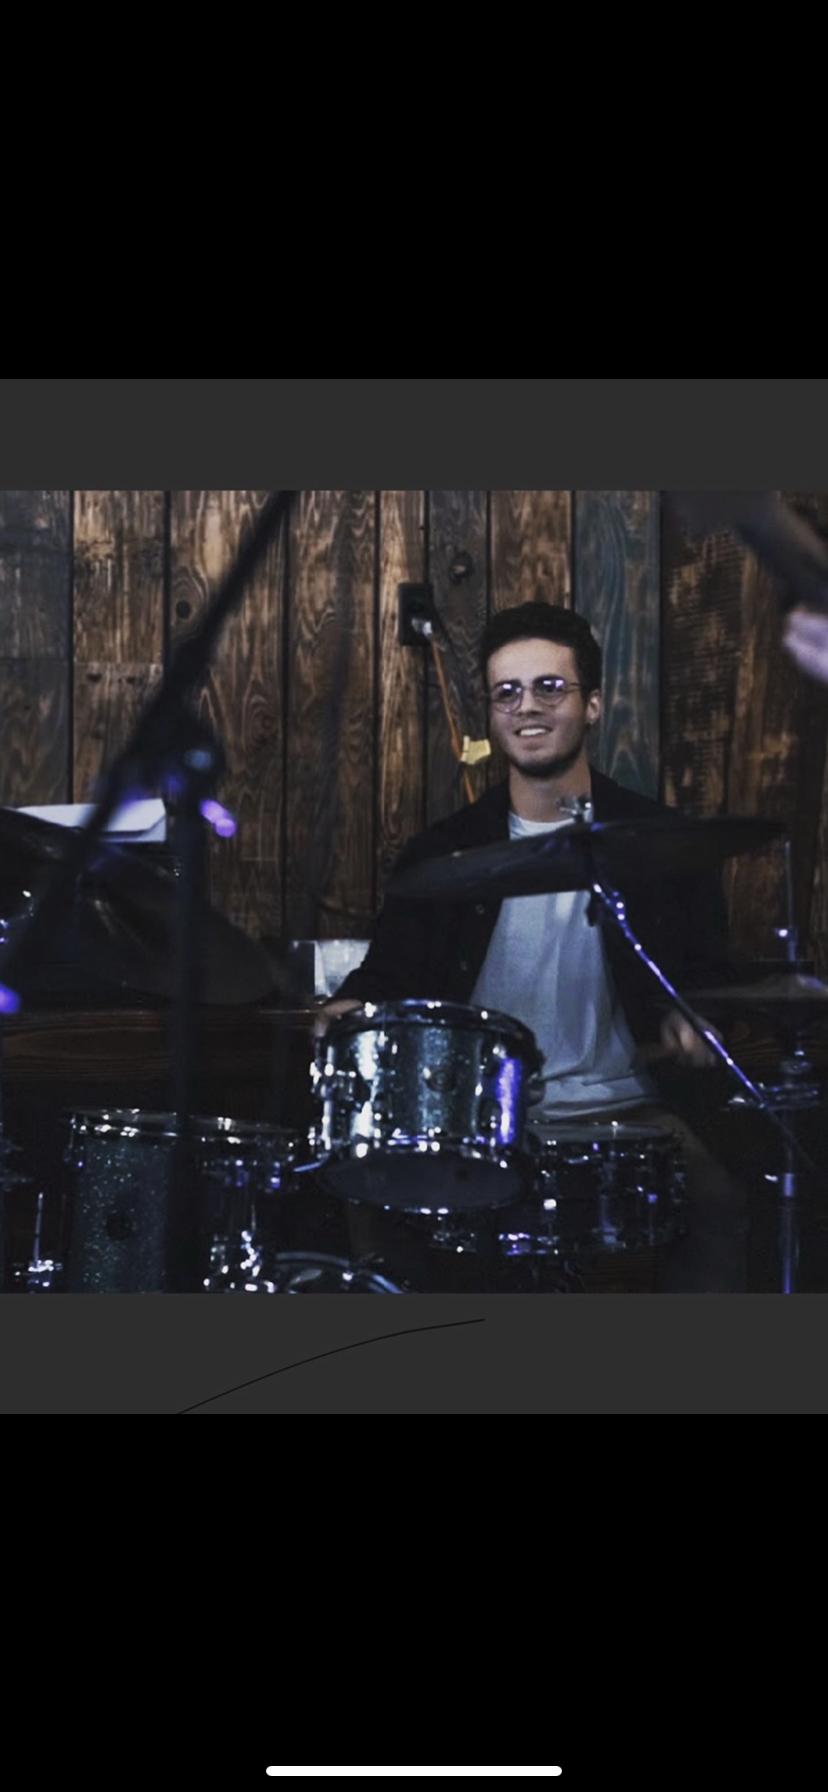 A happy person playing drums in front of a wood paneled wall